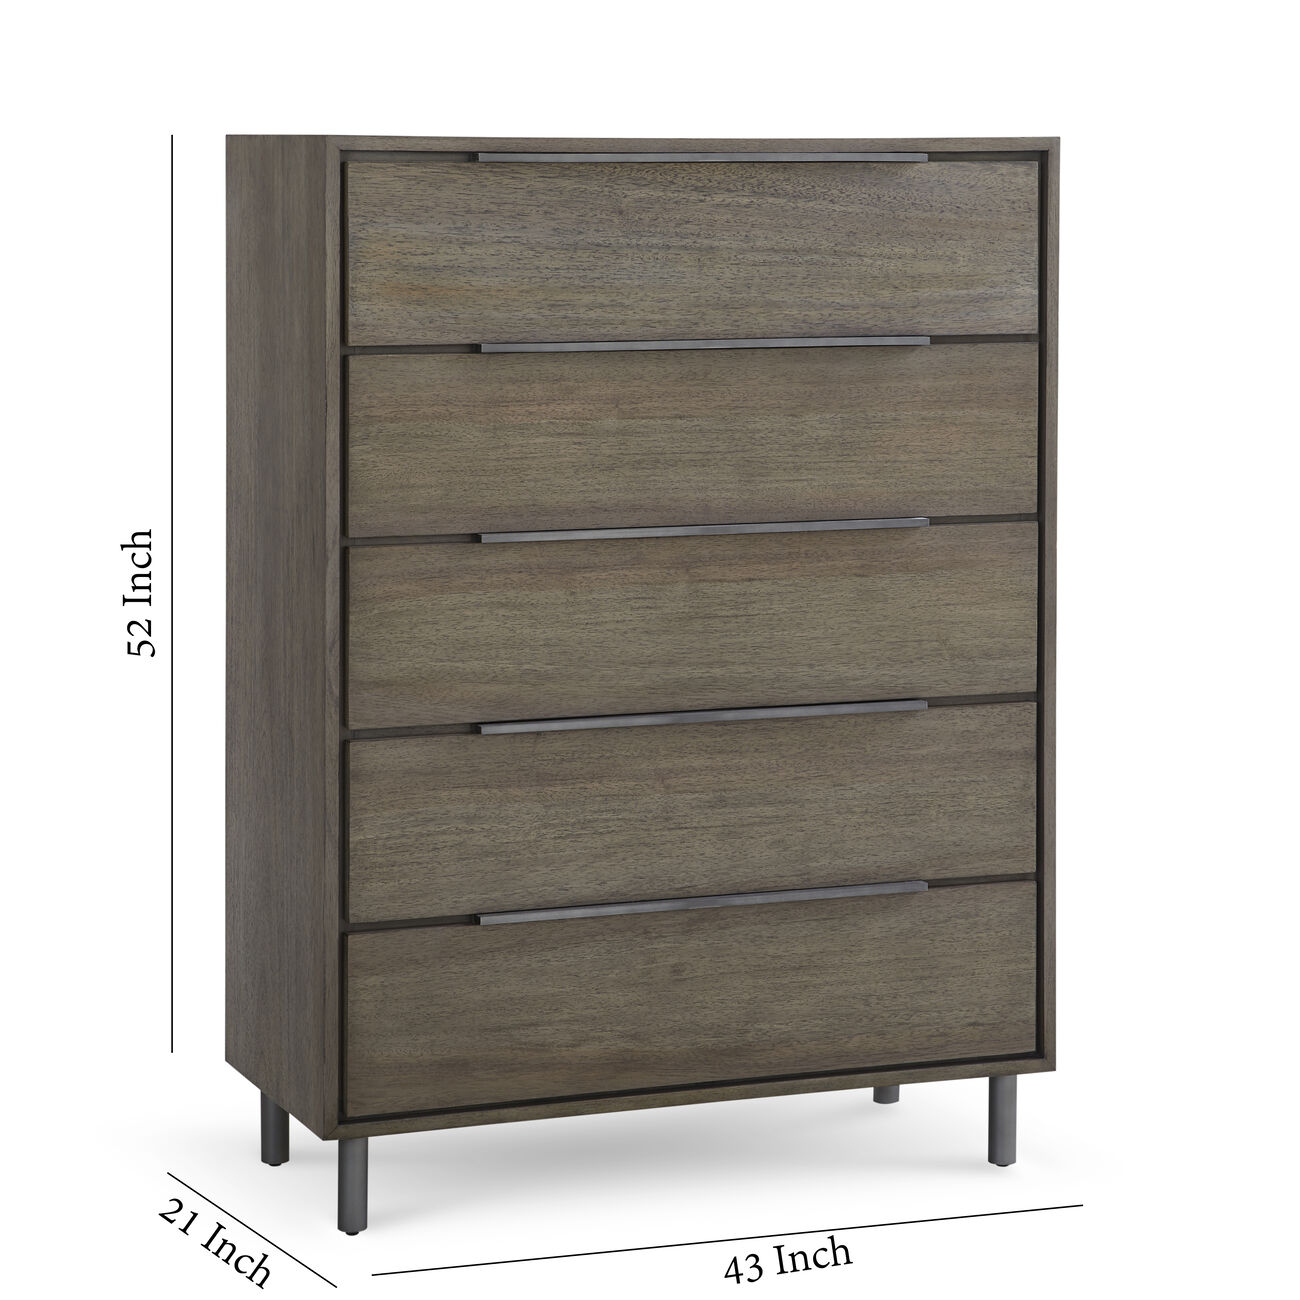 5 Drawer Transitional Wooden Dresser with Tubular Legs, Brown